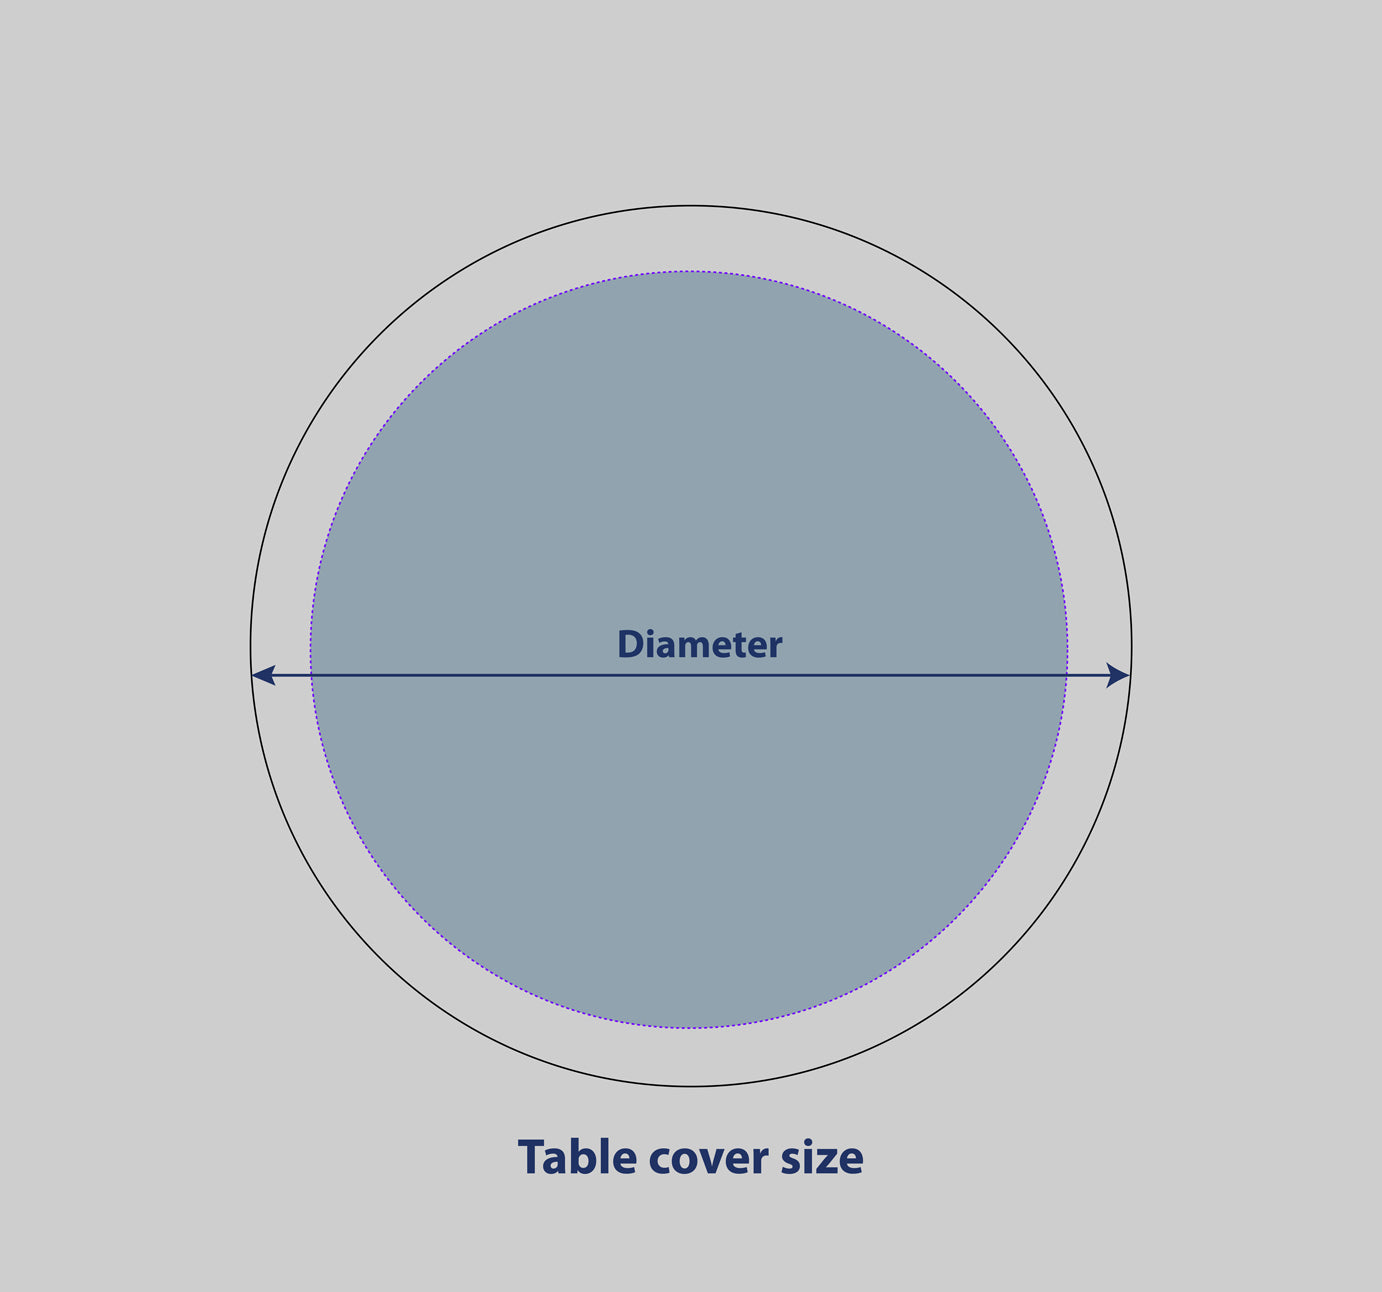 Round Stretch Table Topper - Backdropsource